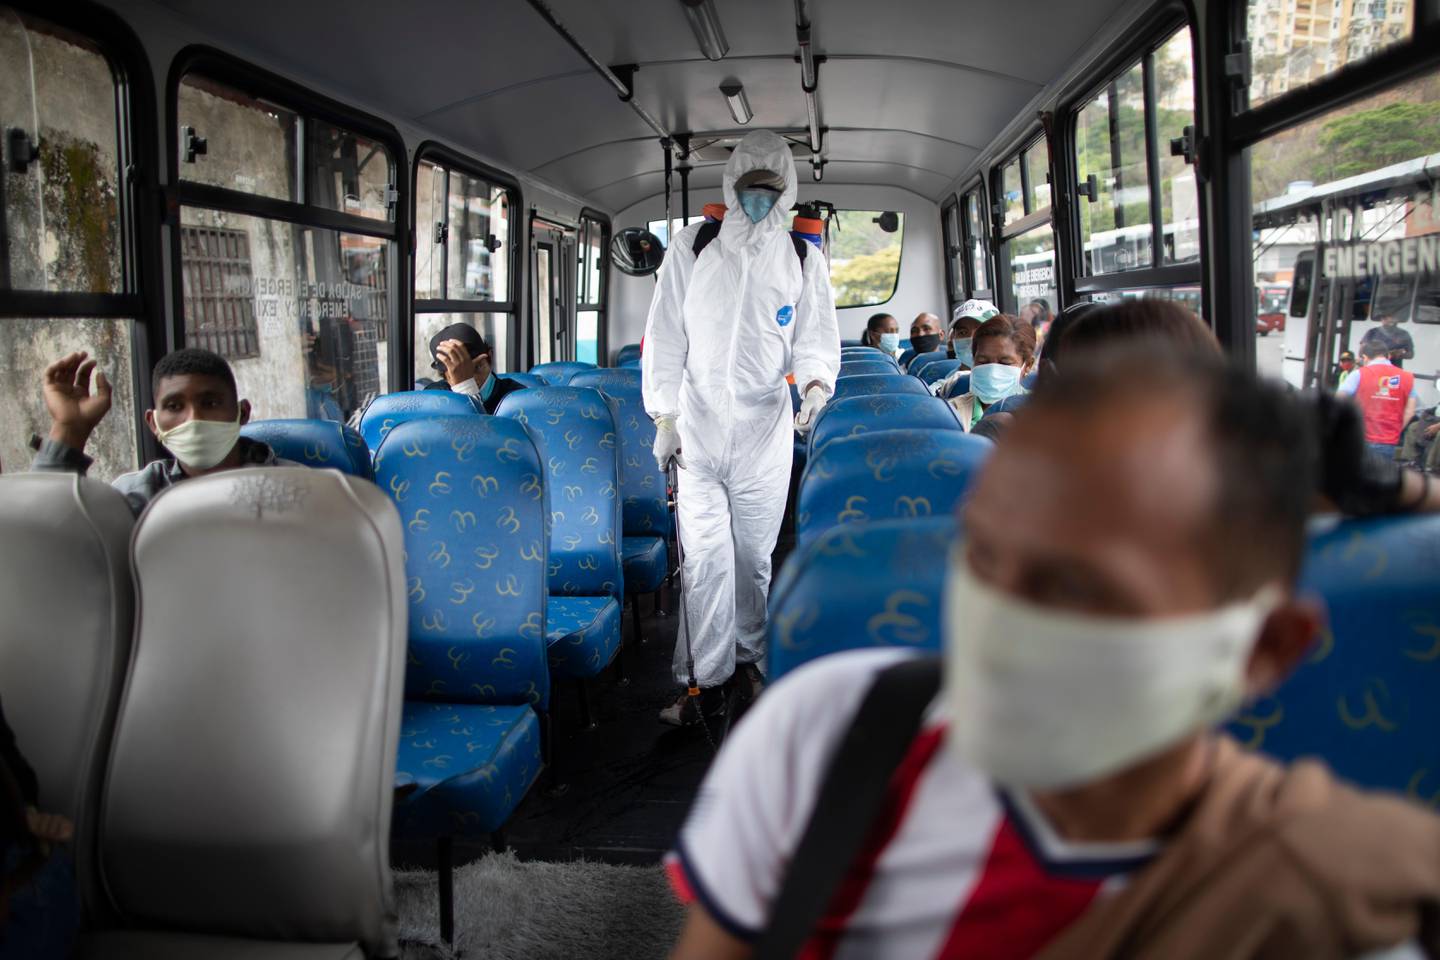 A city worker sprays a disinfectant in the aisle of a bus as a measure to curb the spread of the new coronavirus in Caracas, Venezuela, Tuesday, April 21, 2020. (AP Photo/Ariana Cubillos)